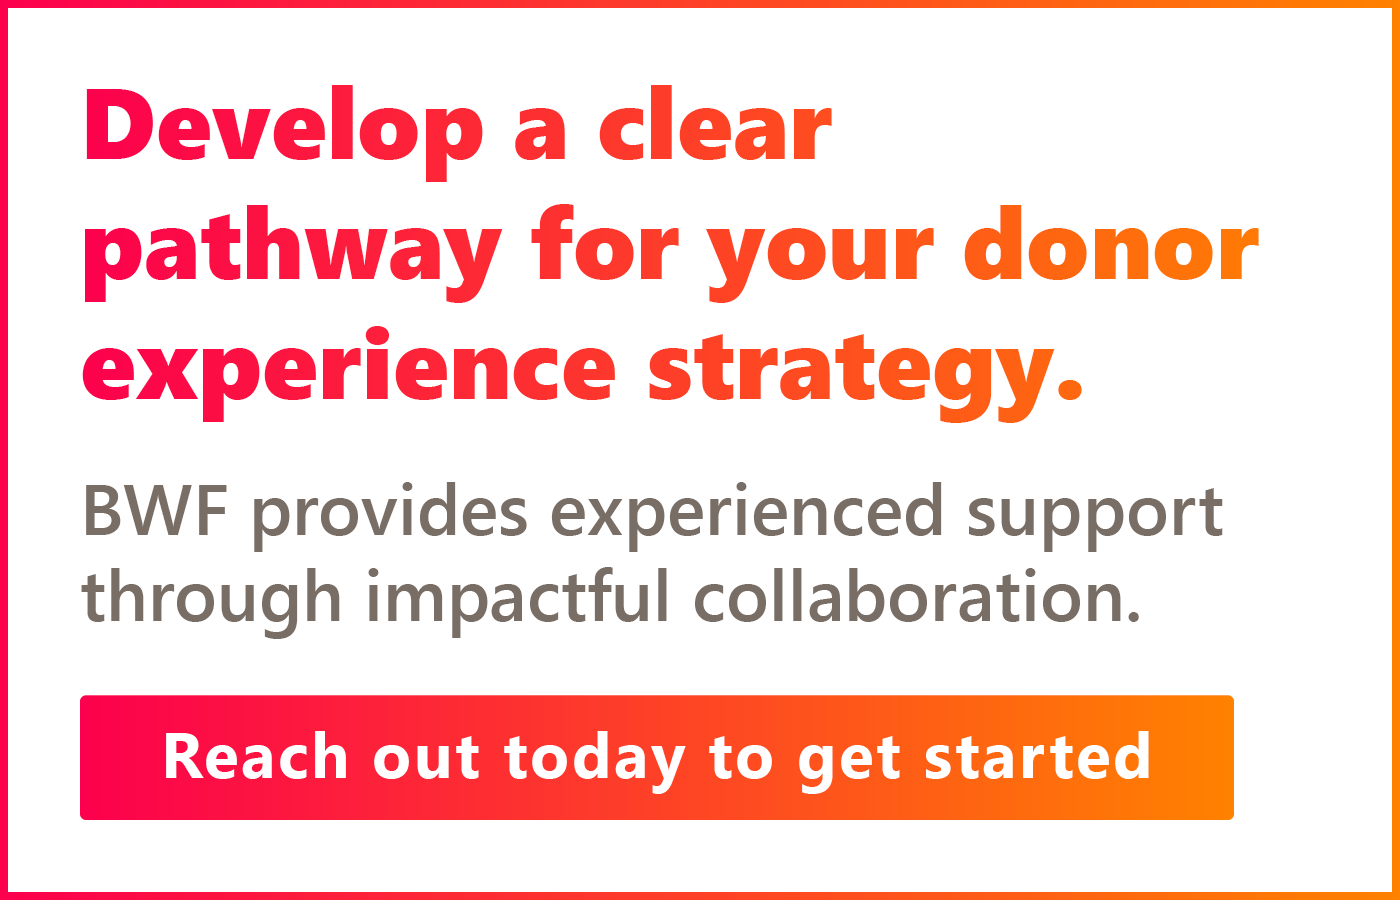 BWF provides experienced support through impactful collaboration. Contact us here. 